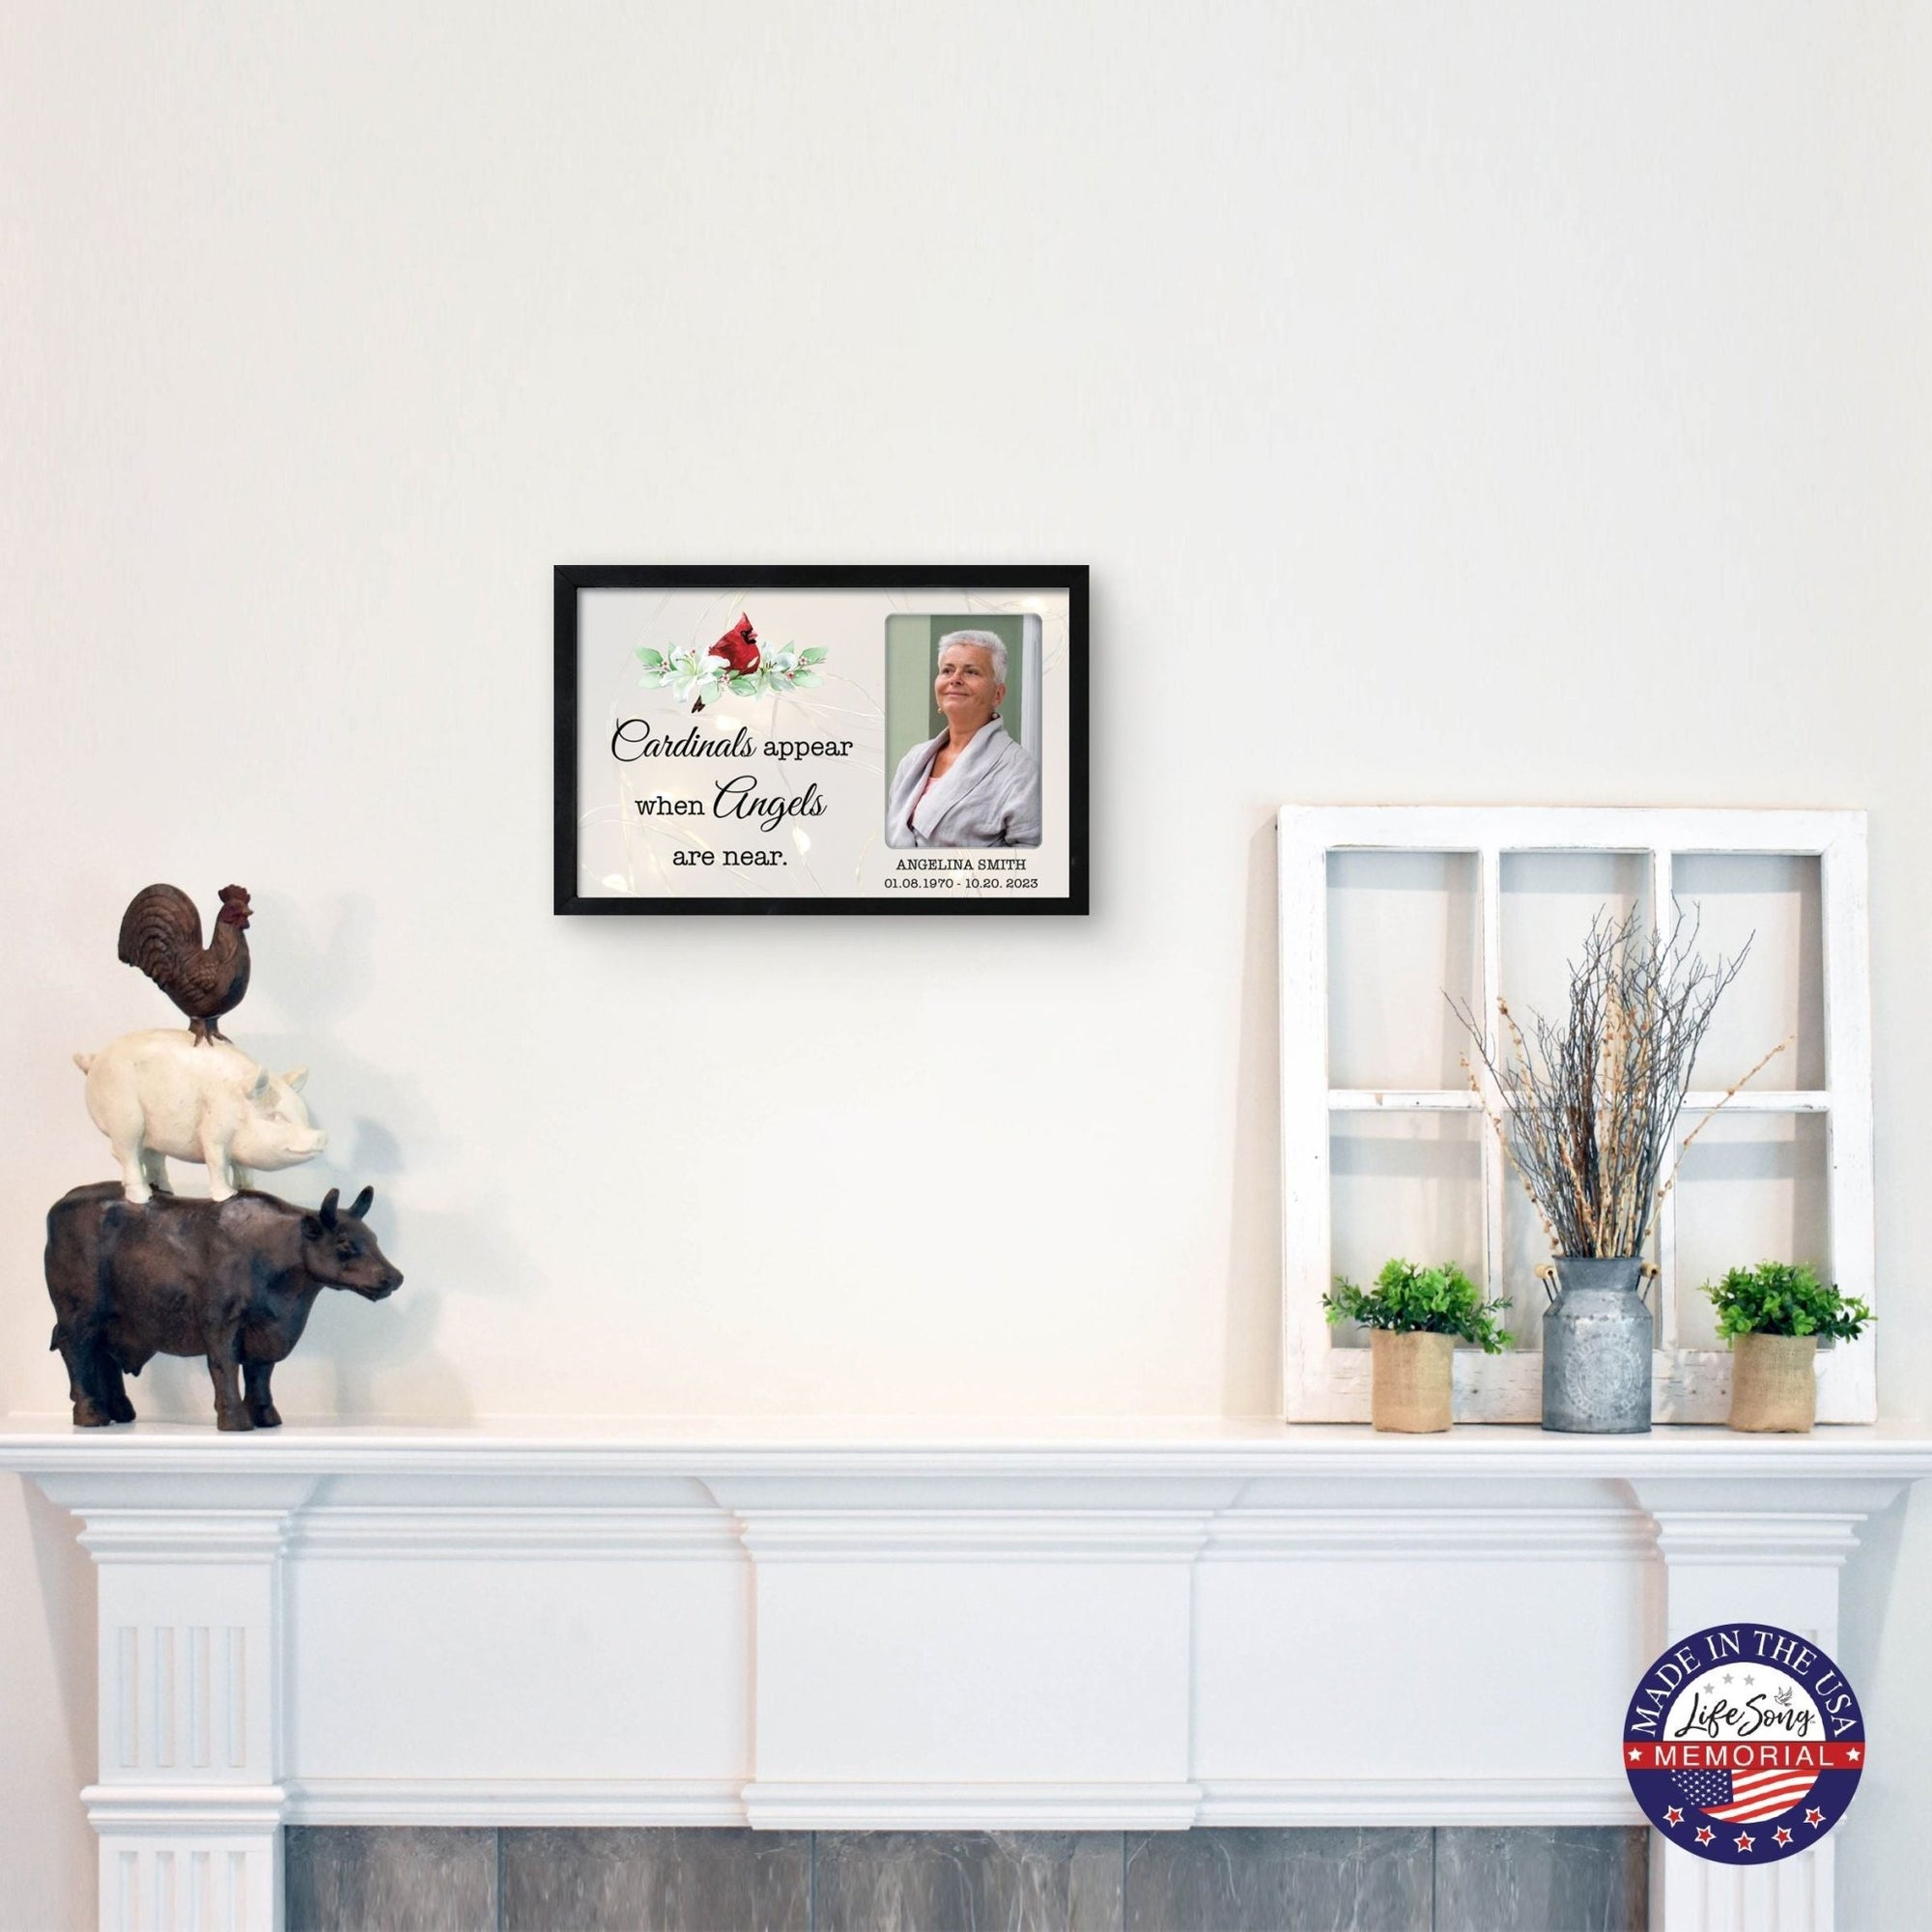 Personalized Memorial Black Framed Shadow Box With Lights Sympathy Gift Wall Décor - Cardinals Appear When Angels Are Near - LifeSong Milestones